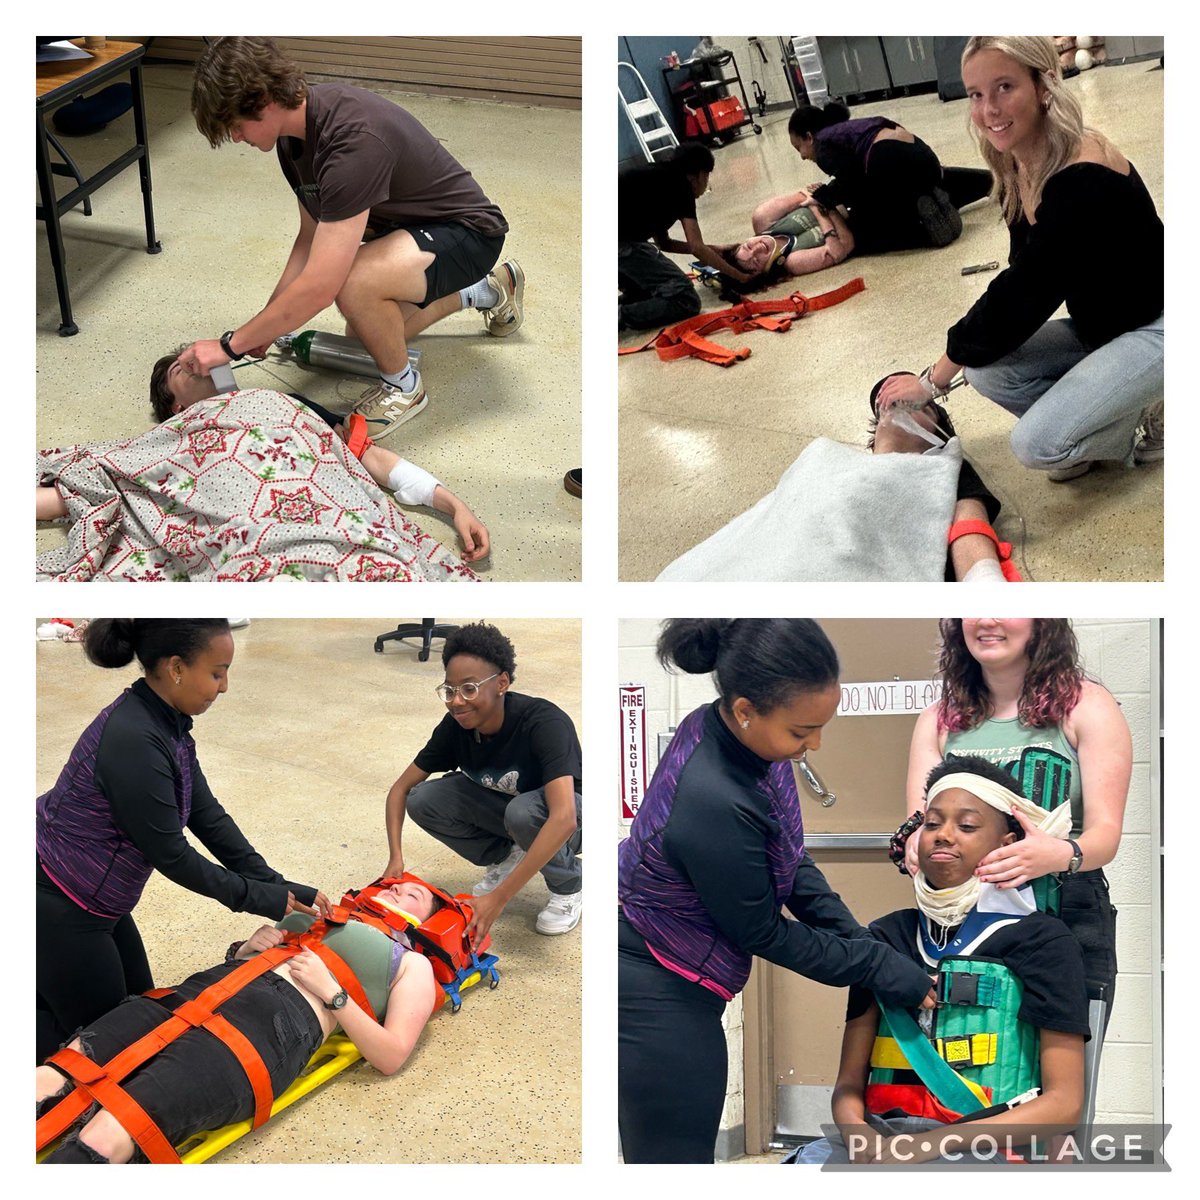 Level II #EMT students stepping up to the plate, confidently facilitating medical assessments and making a real impact in emergency care.
#GettinItDone #SkillsMatter
#NHRECCTE #LeadBoldly 
@NHREC_VA